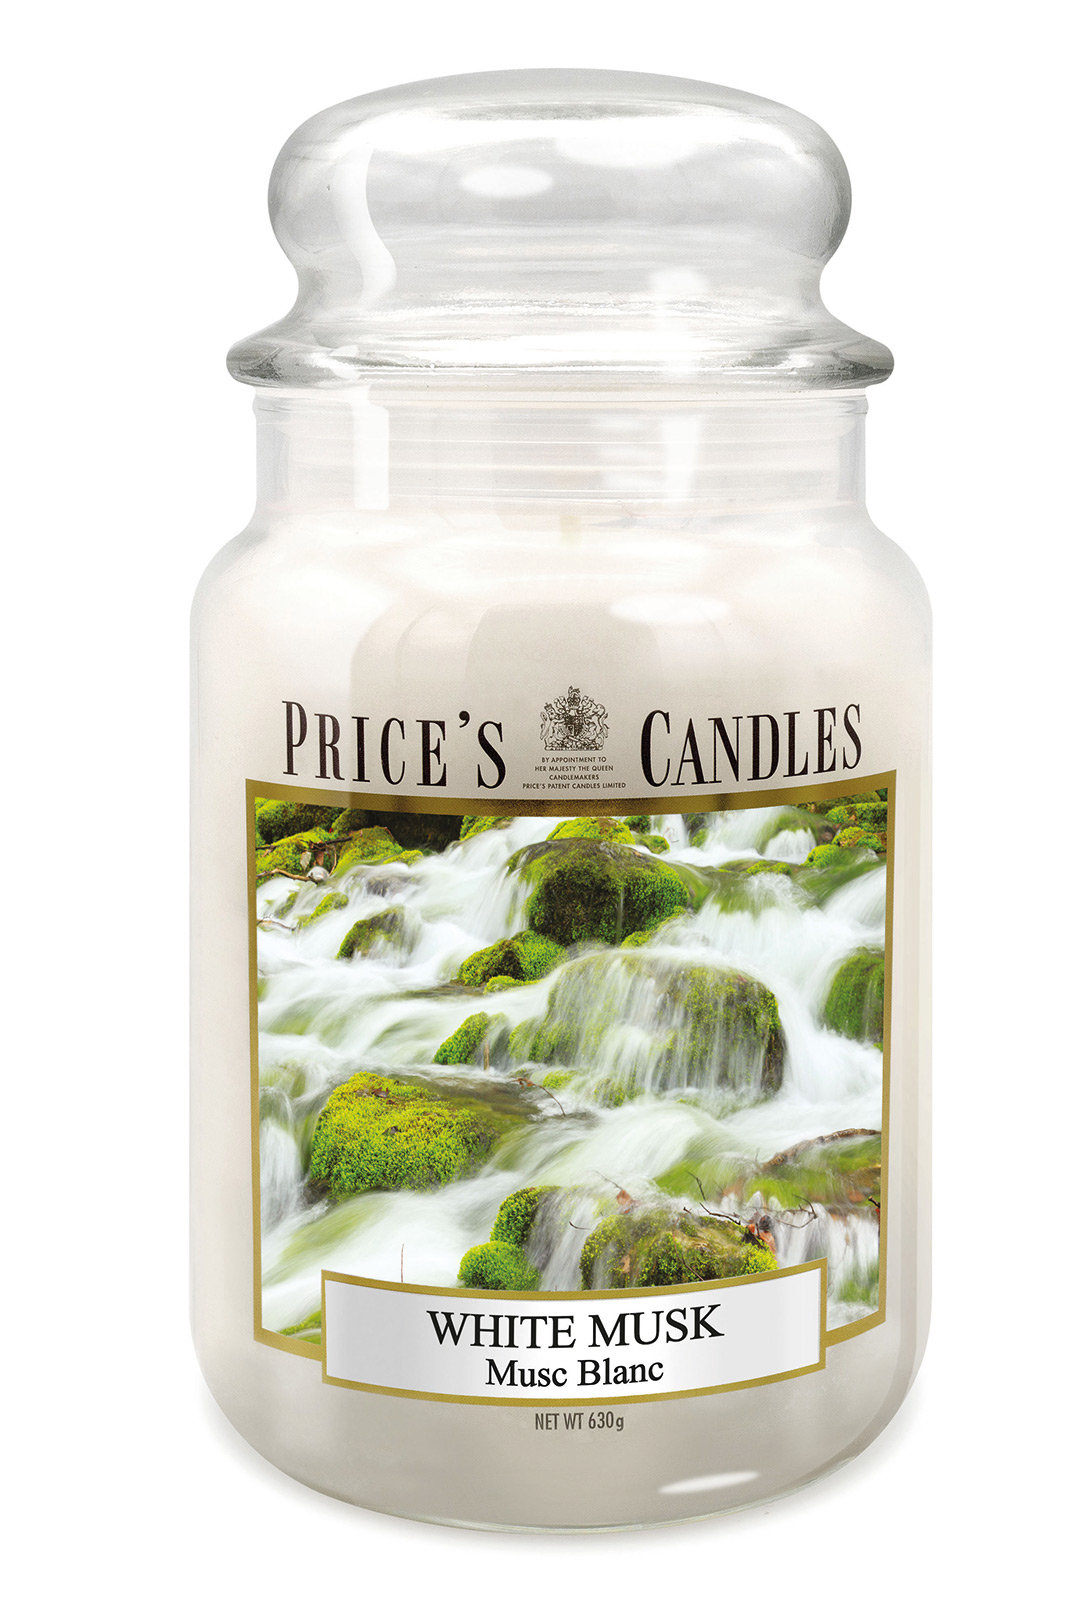 Prices Candle "White Musk" 630g  